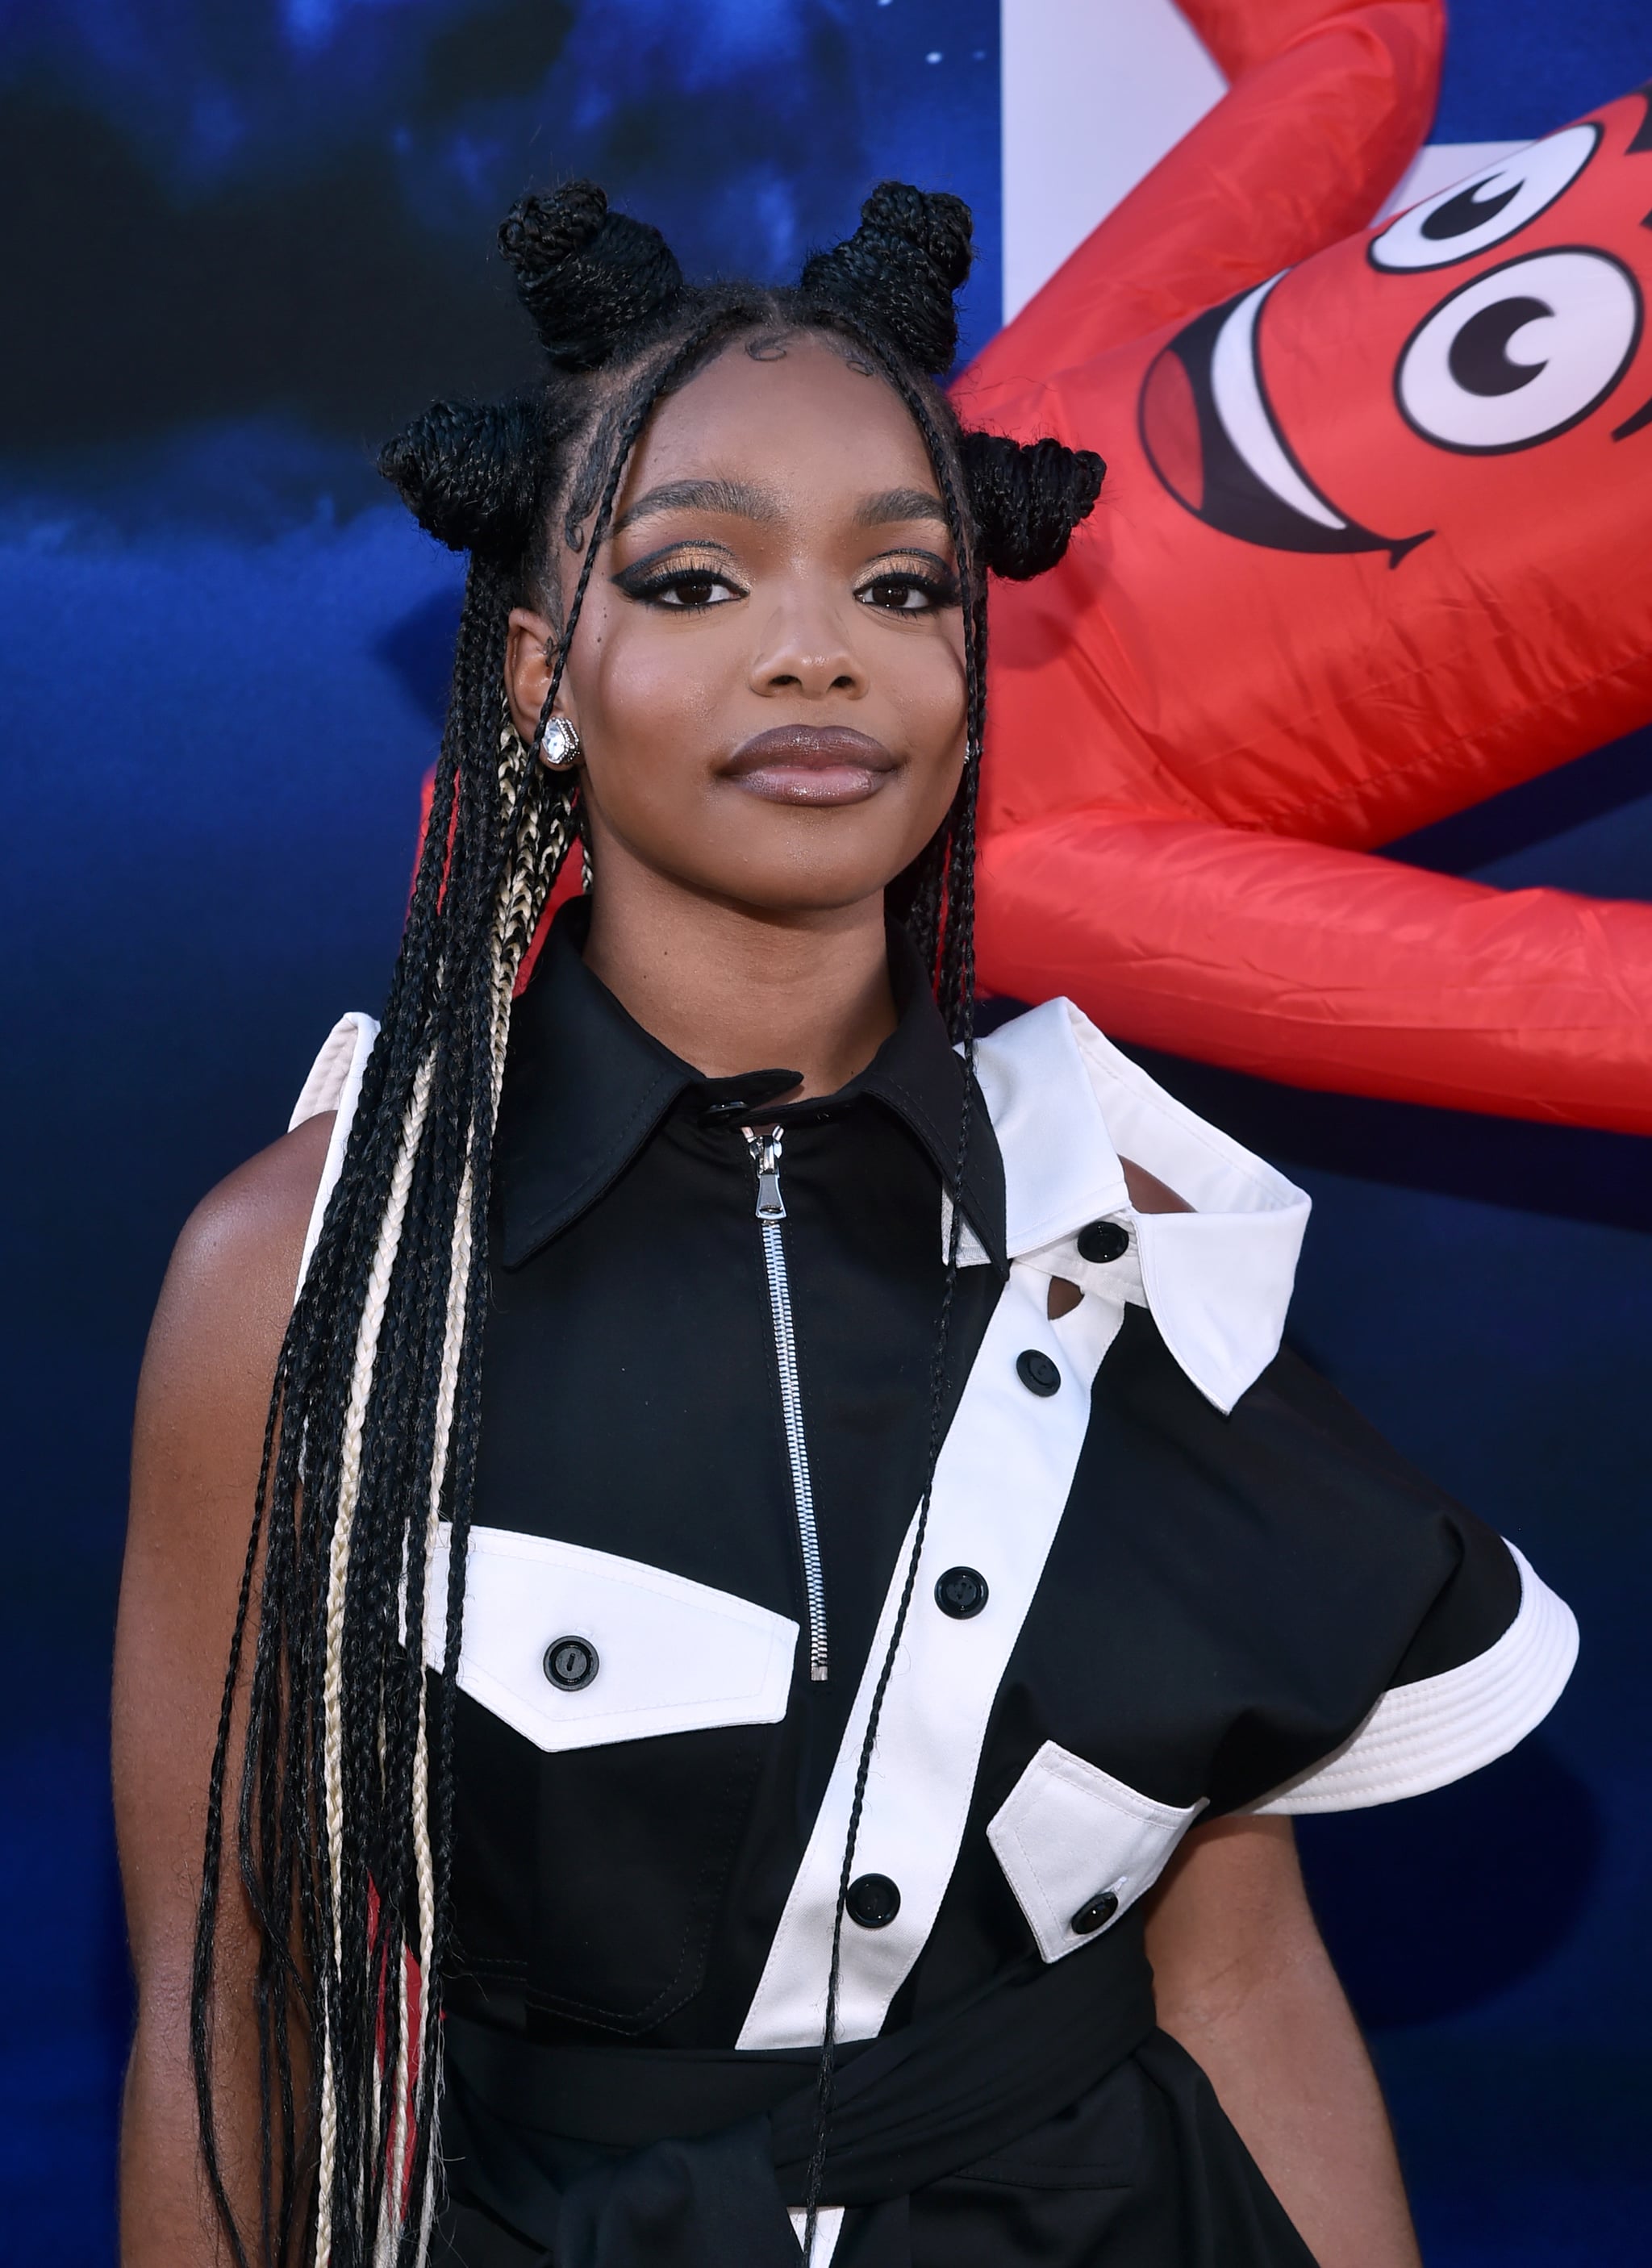 HOLLYWOOD, CALIFORNIA - JULY 18: (VANITY FAIR OUT) Marsai Martin attends the world premiere of Universal Pictures' 